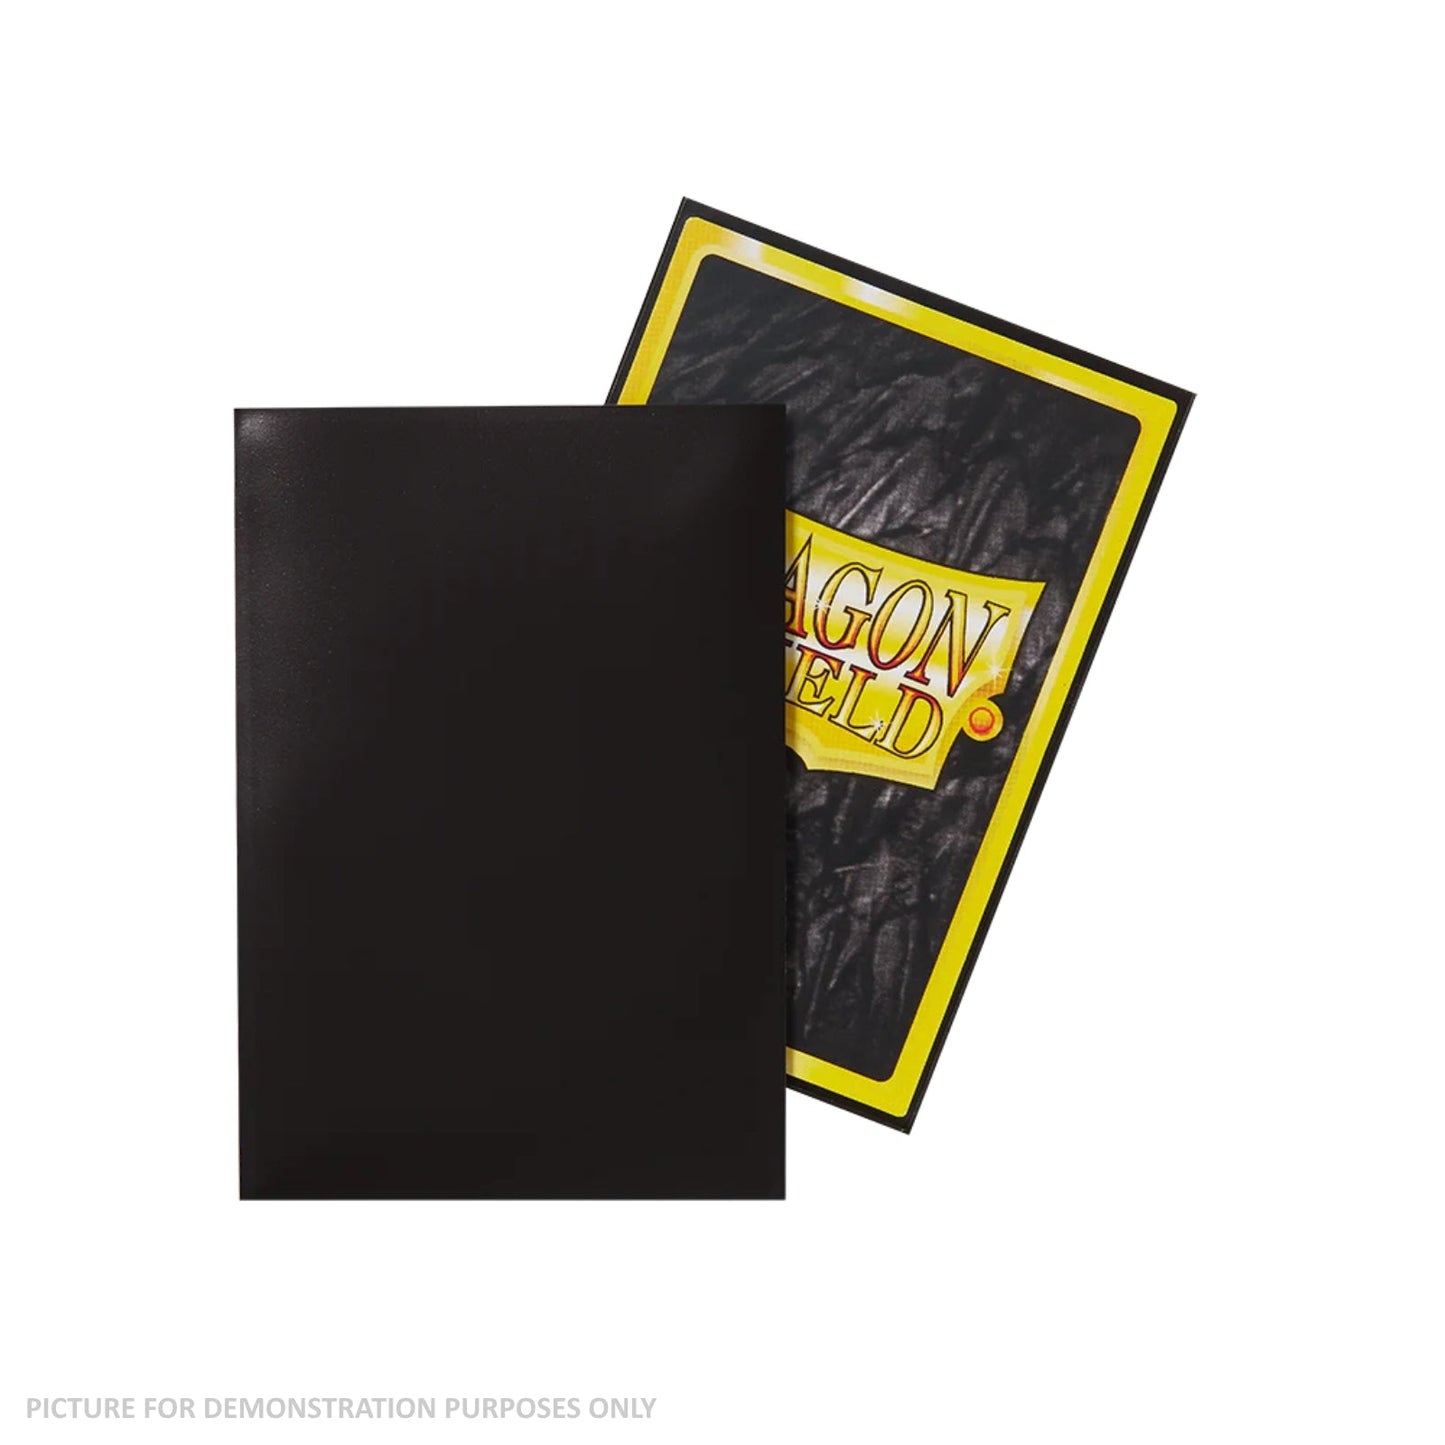 Dragon Shield 60 Japanese Size Card Sleeves - Classic Black